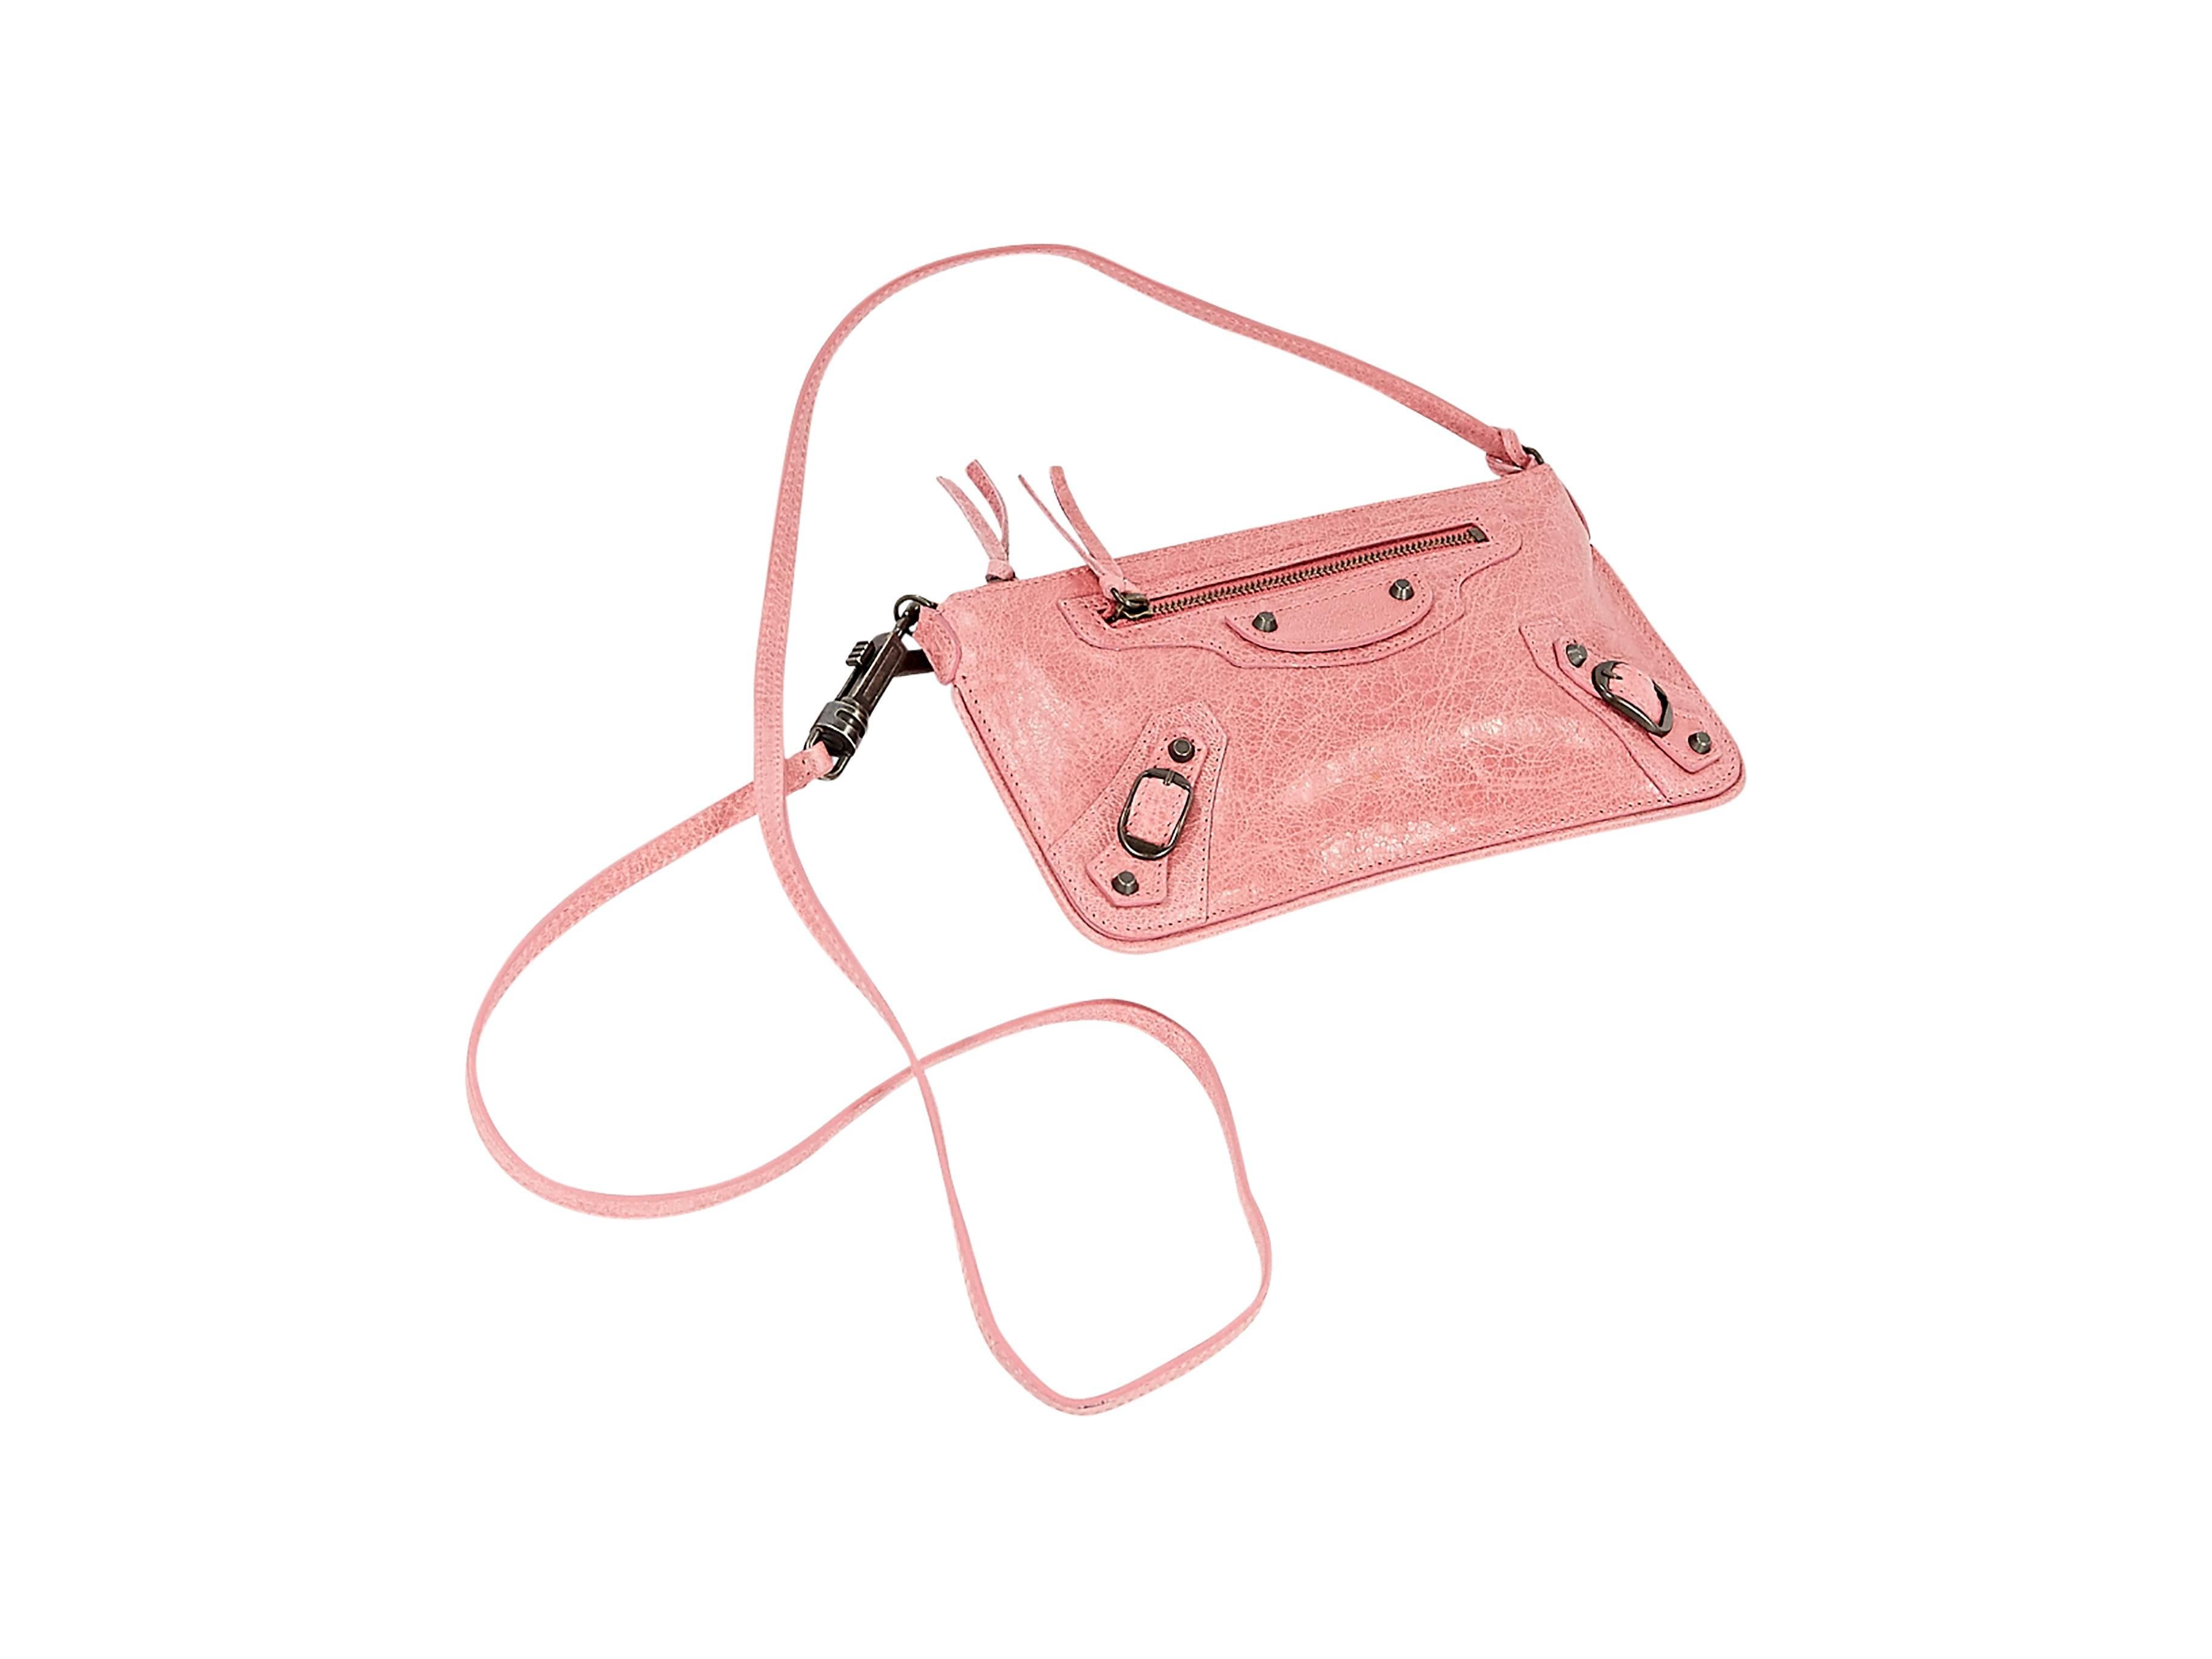 Pink leather crossbody bag by Balenciaga.  Detachable crossbody strap.  Top zip closure.  Front zip pocket.  Two buckle front accents.  Black hardware.  9